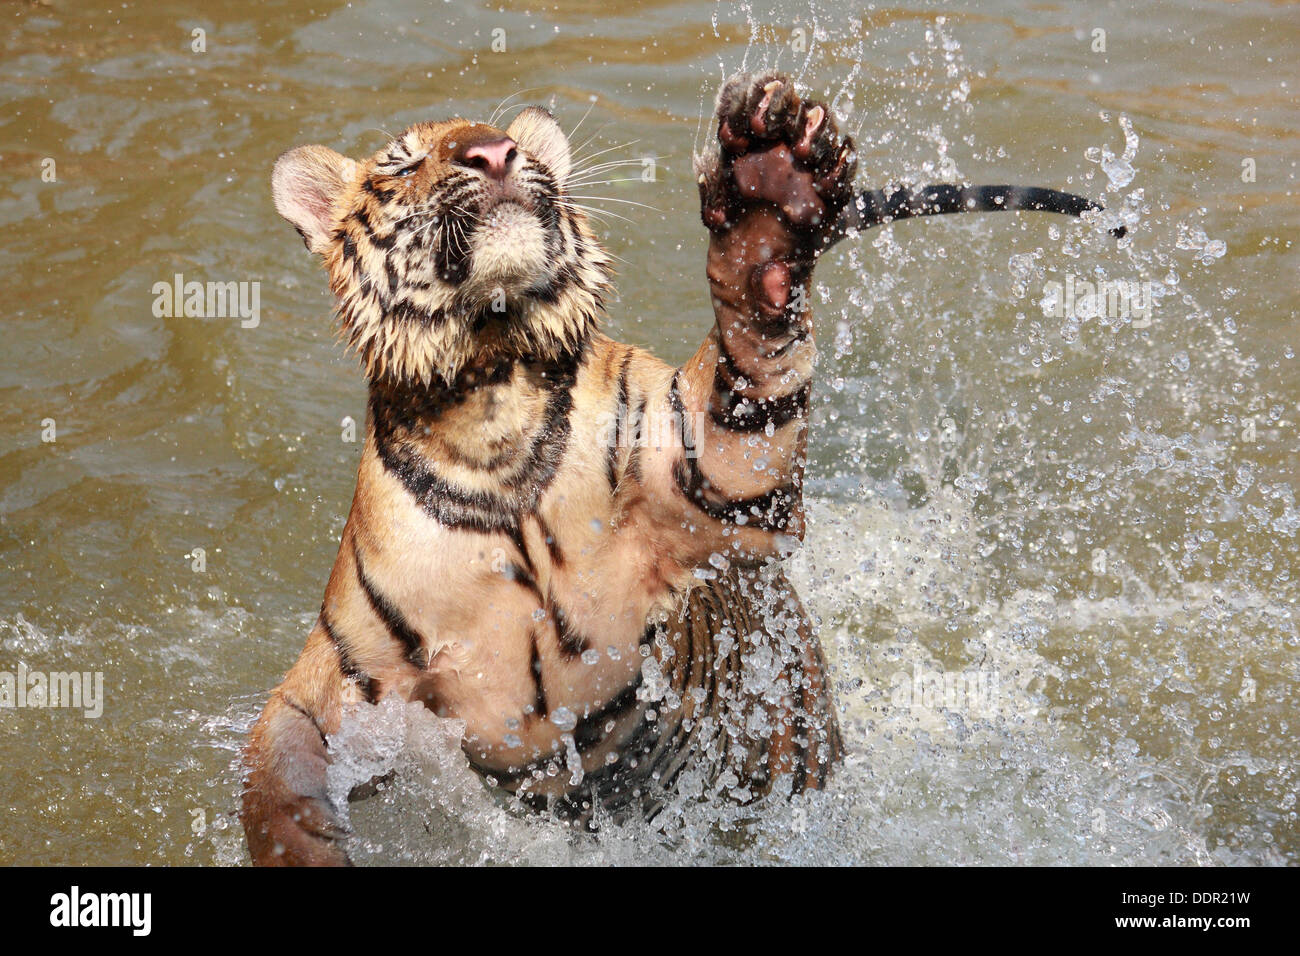 Jumping Tiger Stock Photos and Images - 123RF